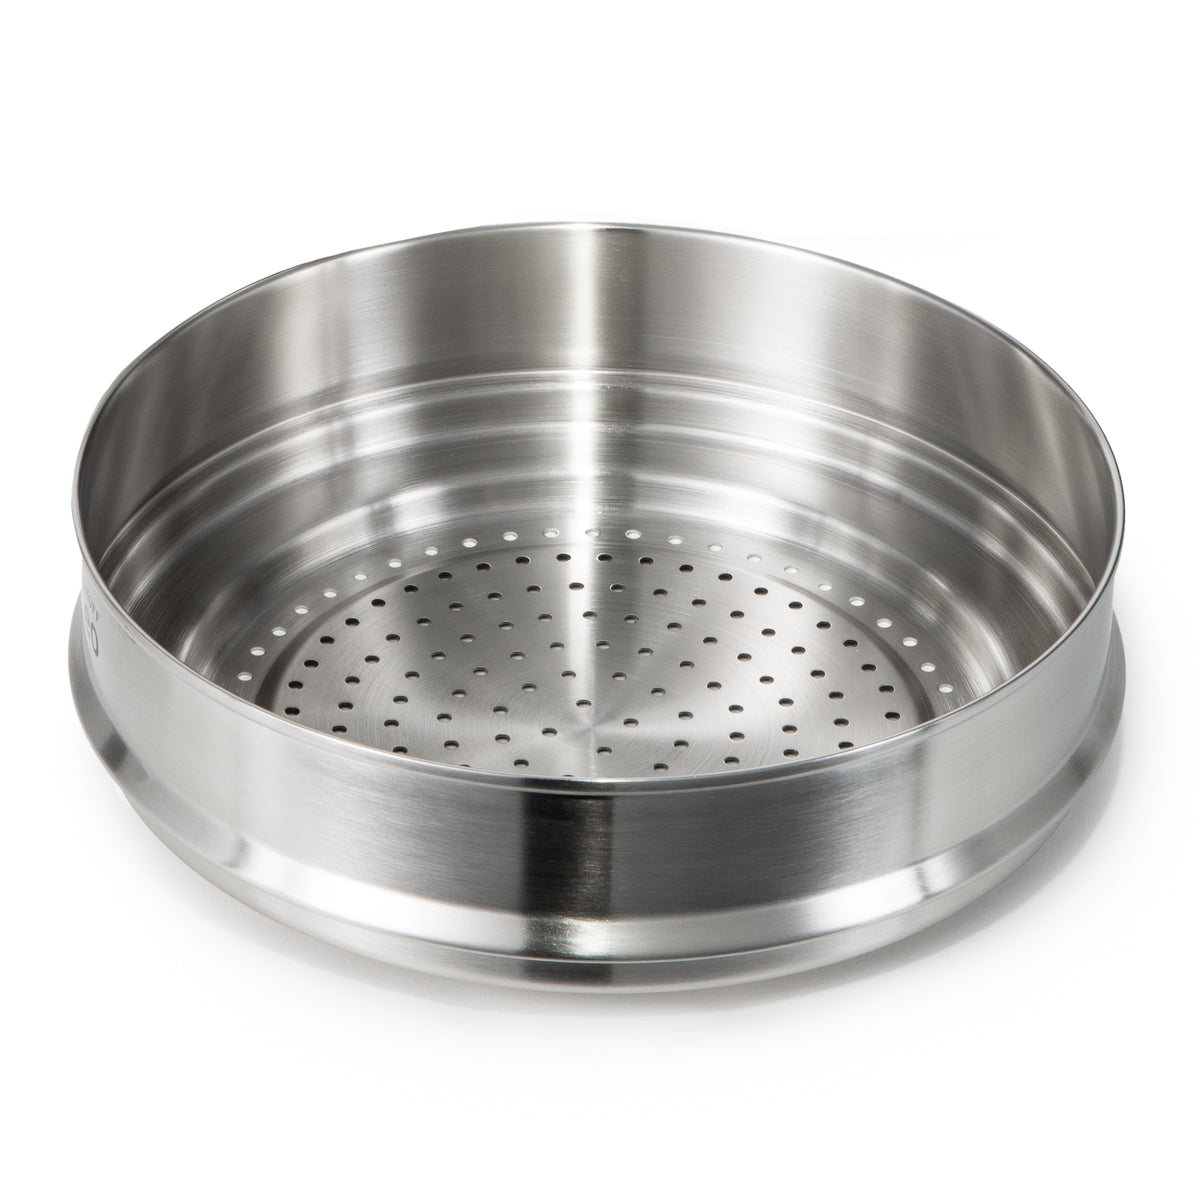 BergHOFF Graphite Recycled 18/10 Stainless Steel Steamer Insert 10